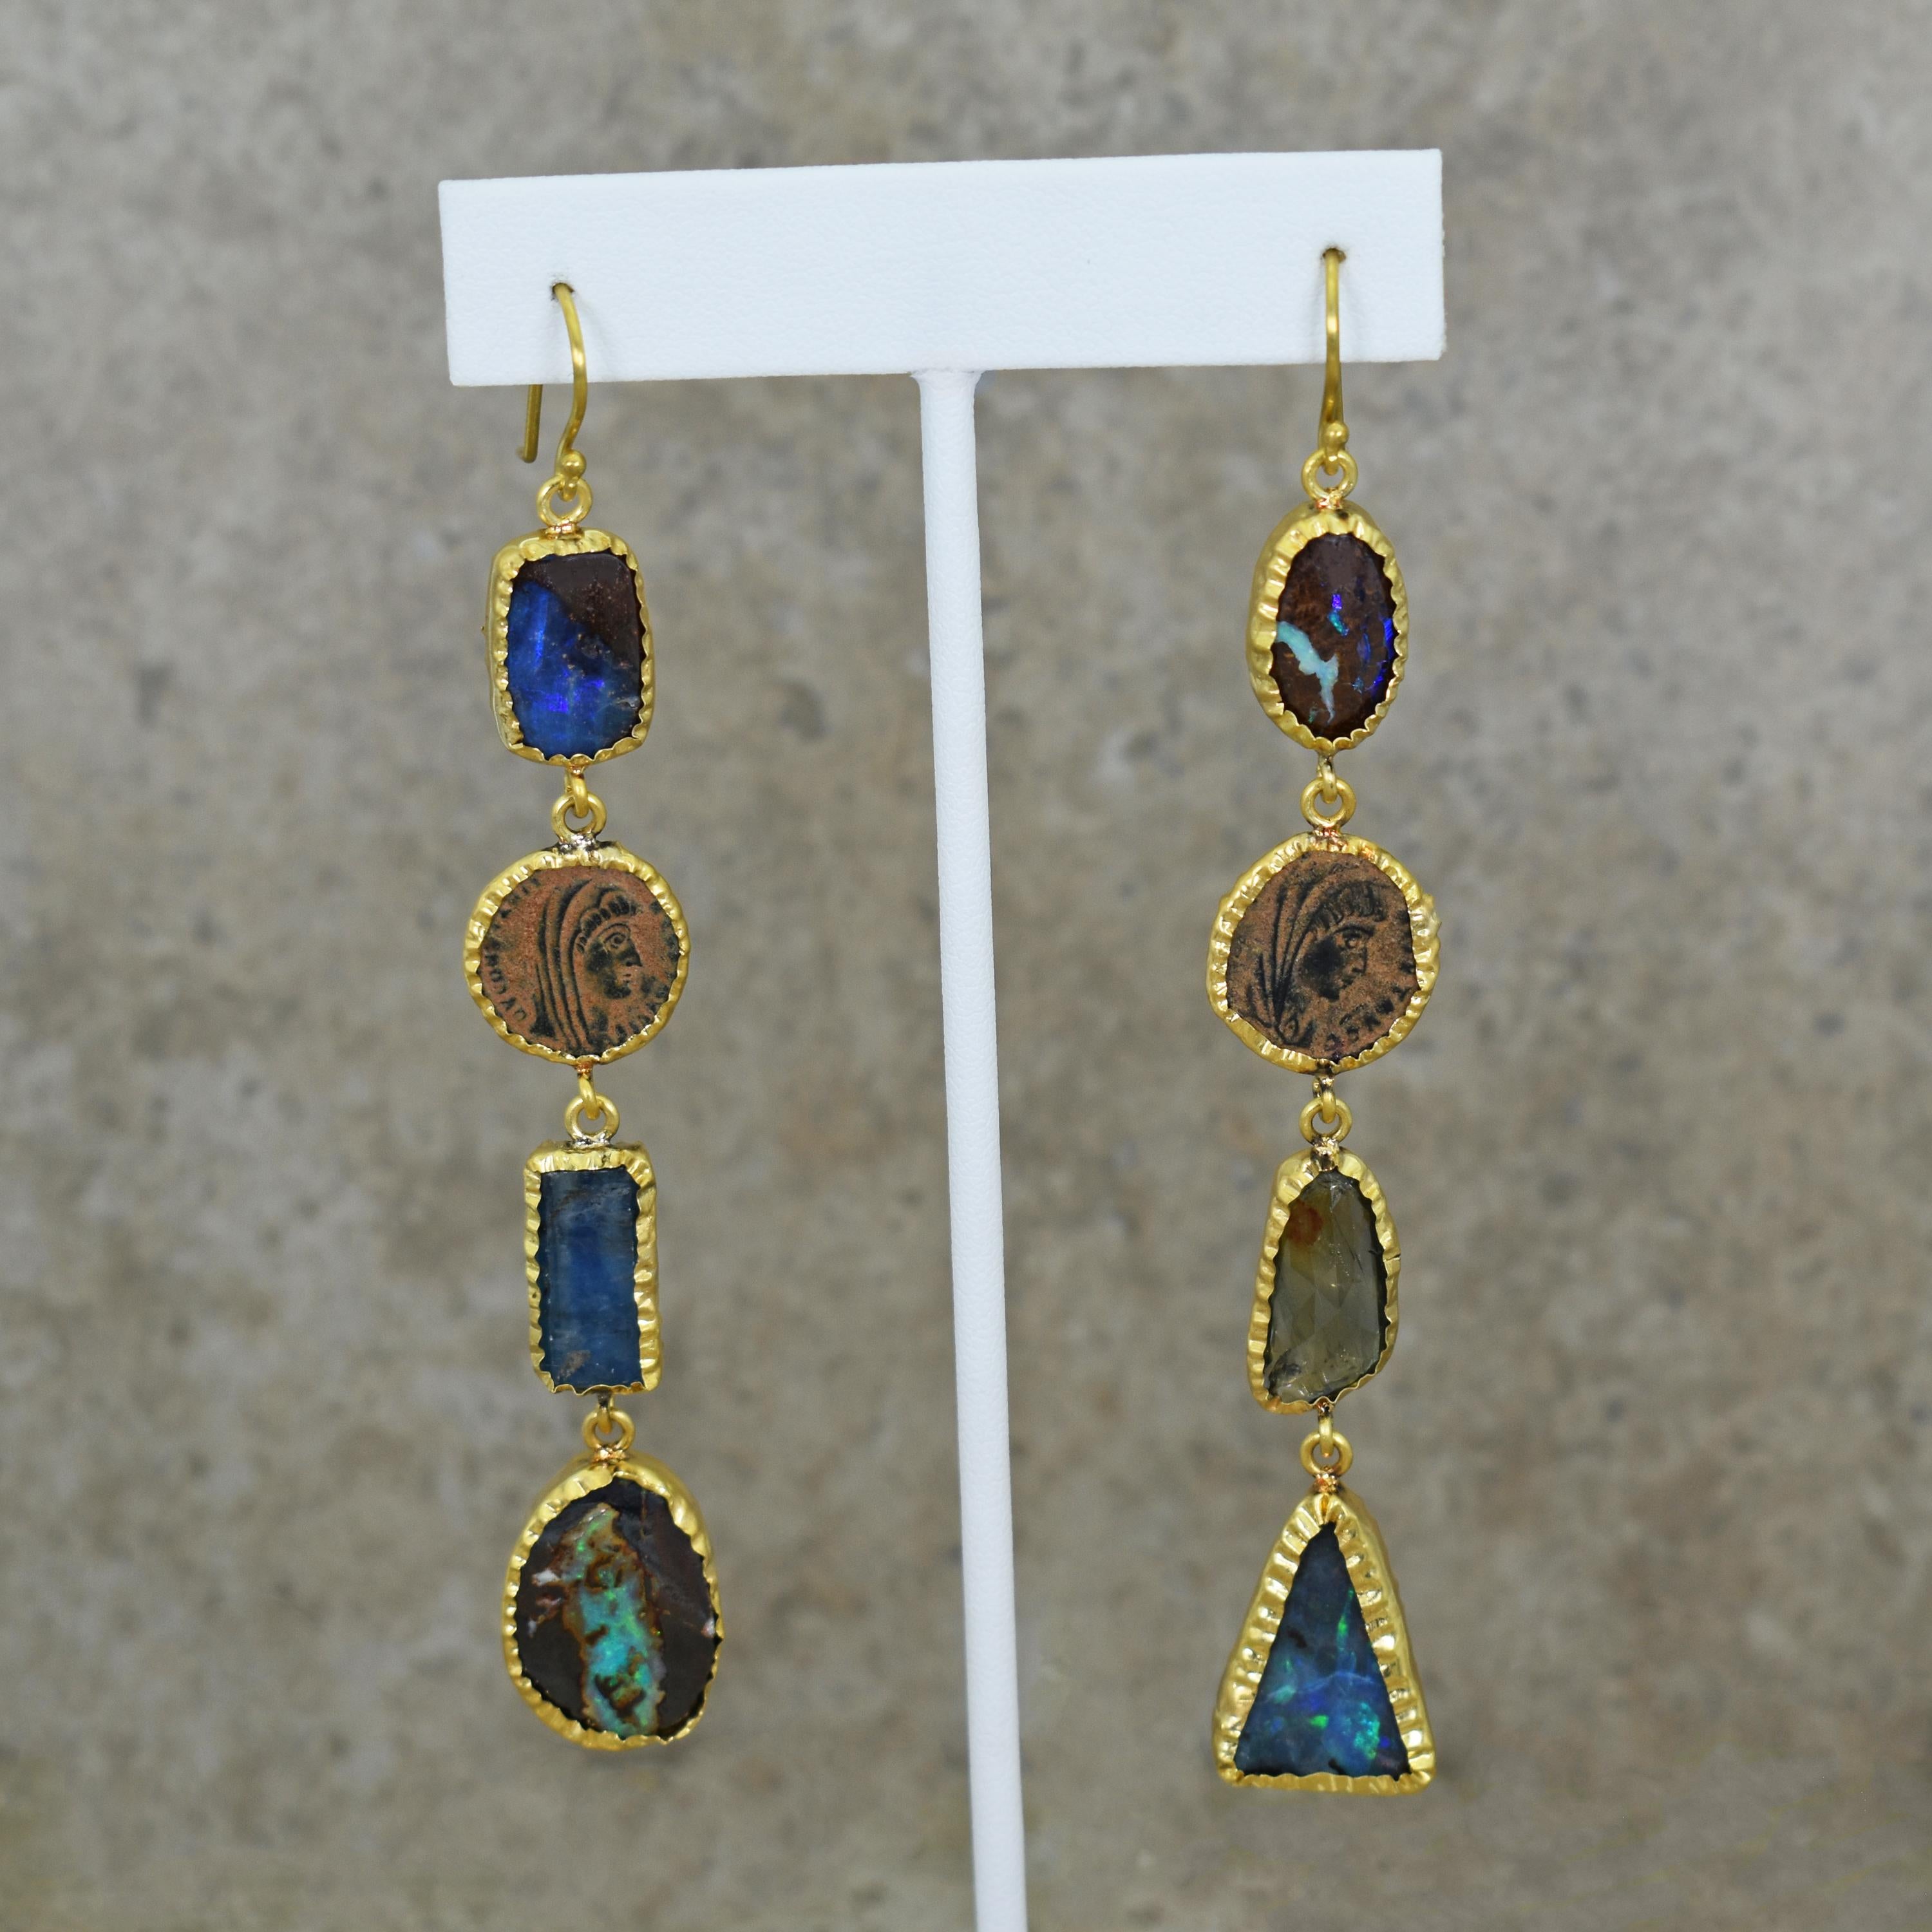 Hand-wrapped 22k yellow gold asymmetrical shoulder-duster dangle earrings featuring a variety of Australian Boulder Opals, blue and green Aquamarine, and two ancient Roman bronze coins. Roman coins include Constantine the Great 